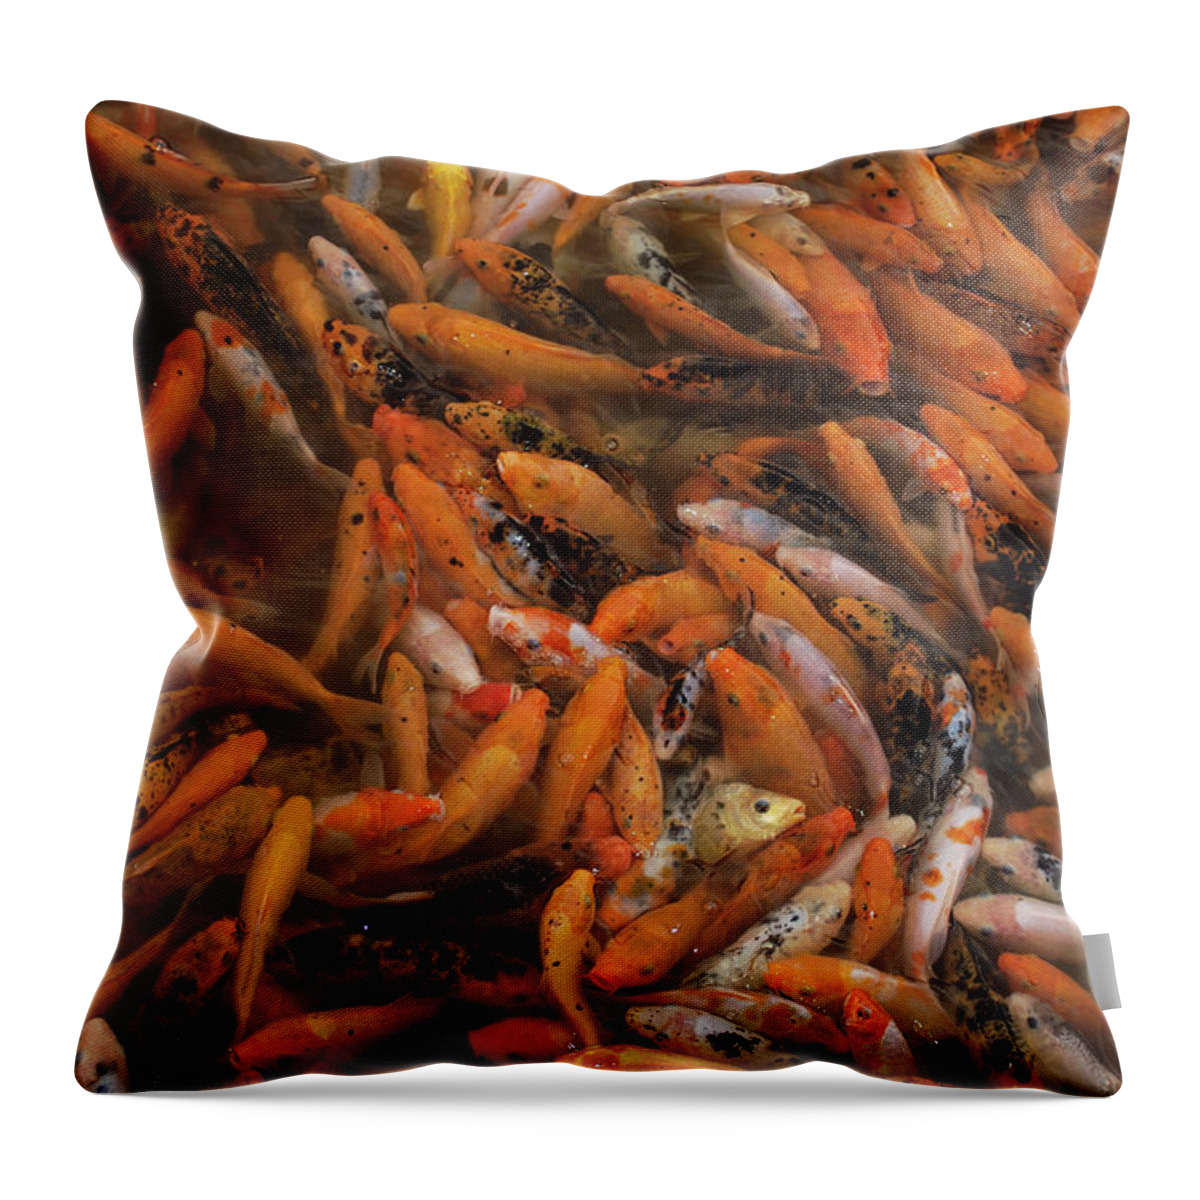 00210406 Throw Pillow featuring the photograph Koi School China by Pete Oxford